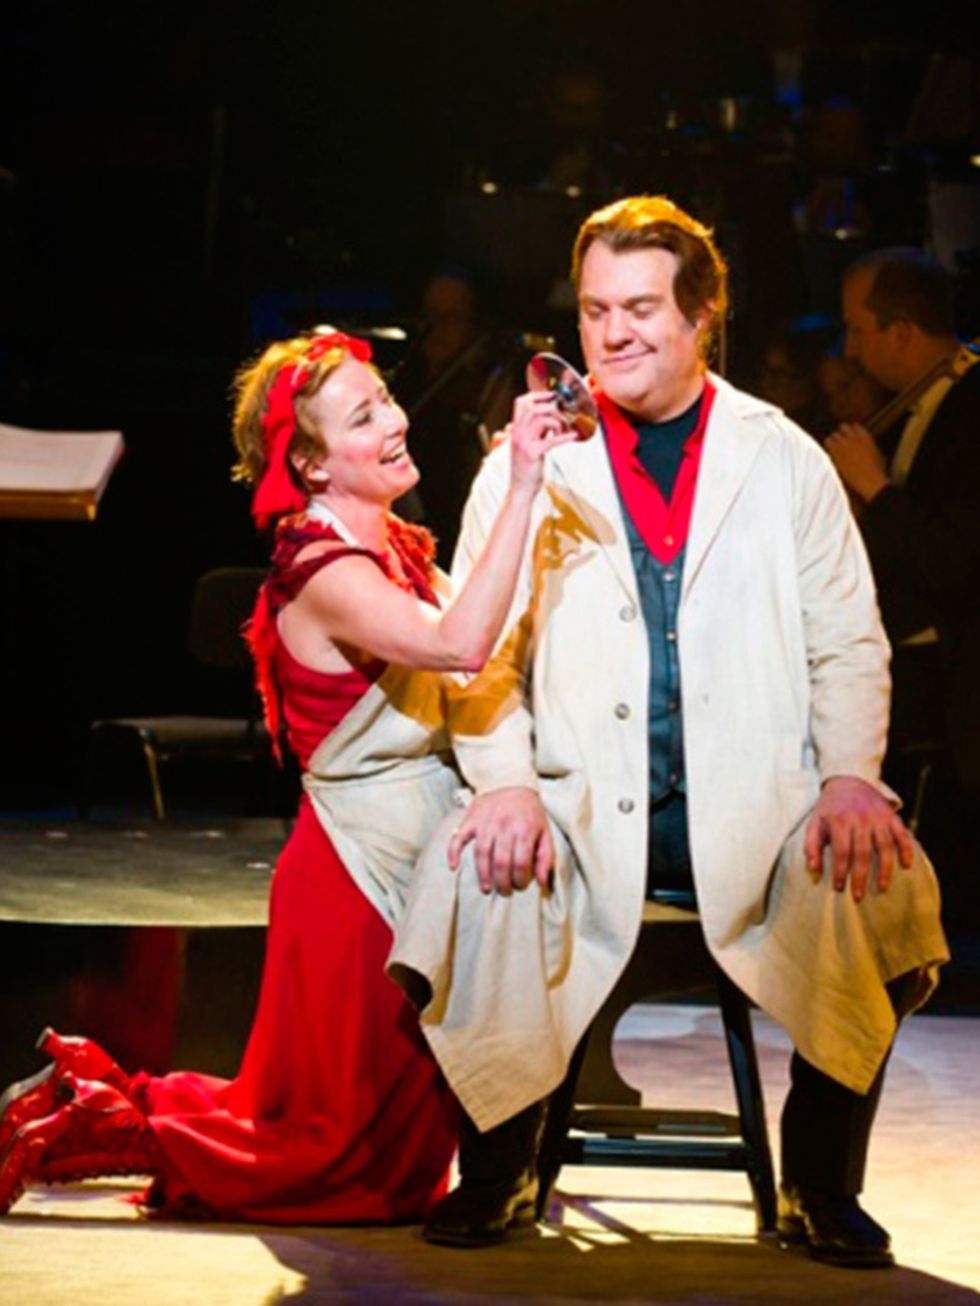 <p><strong>THEATRE: Sweeney Todd</strong></p>

<p>The much anticipated production of Stephen Sondheims musical, Sweeney Todd: The Demon Barber Of Fleet Street- is showing at the English National Opera this weekend.</p>

<p>In this ghoulish thriller, Byrn